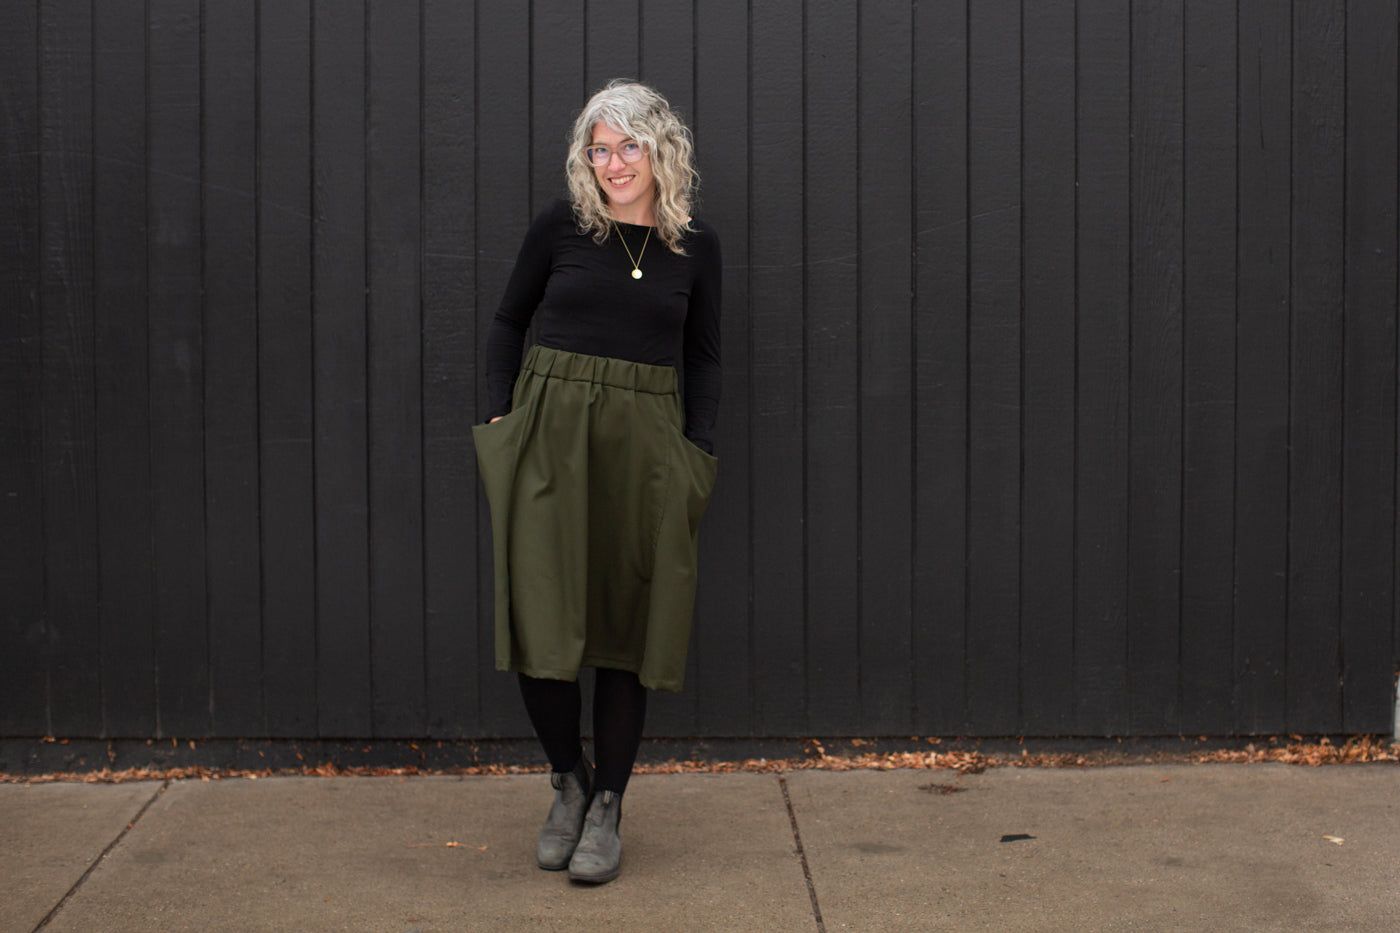 Jaime standing against a black wall looking at the camera smiling.  Jaime is wearing a black long sleeve shirt, olive green skirt, black leggings and black shoes.